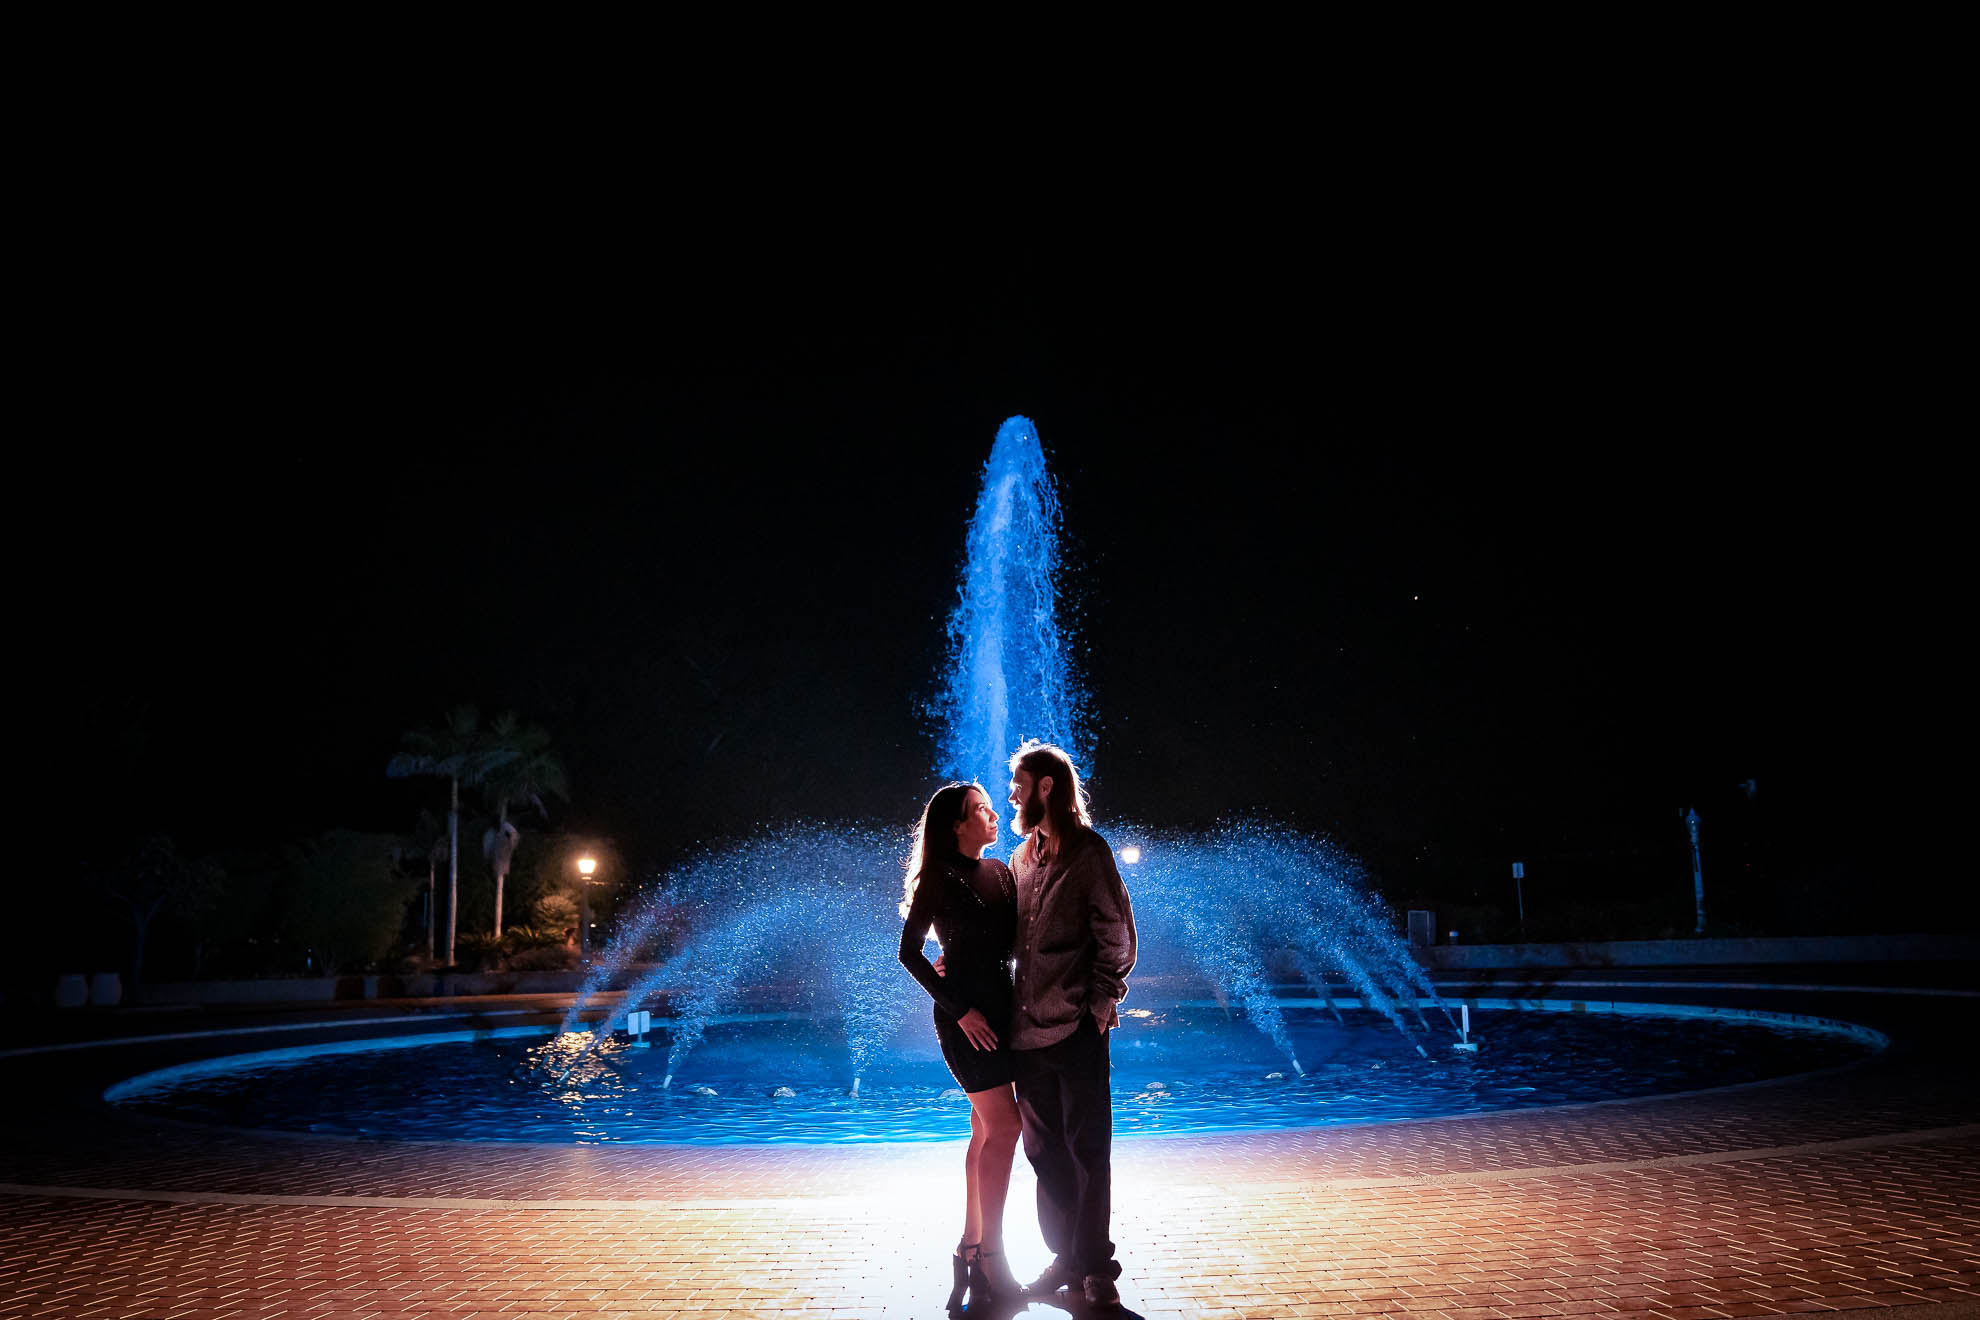 ThomasKim_photography A couple standing in front of a fountain in San Diego's Balboa Park at night.